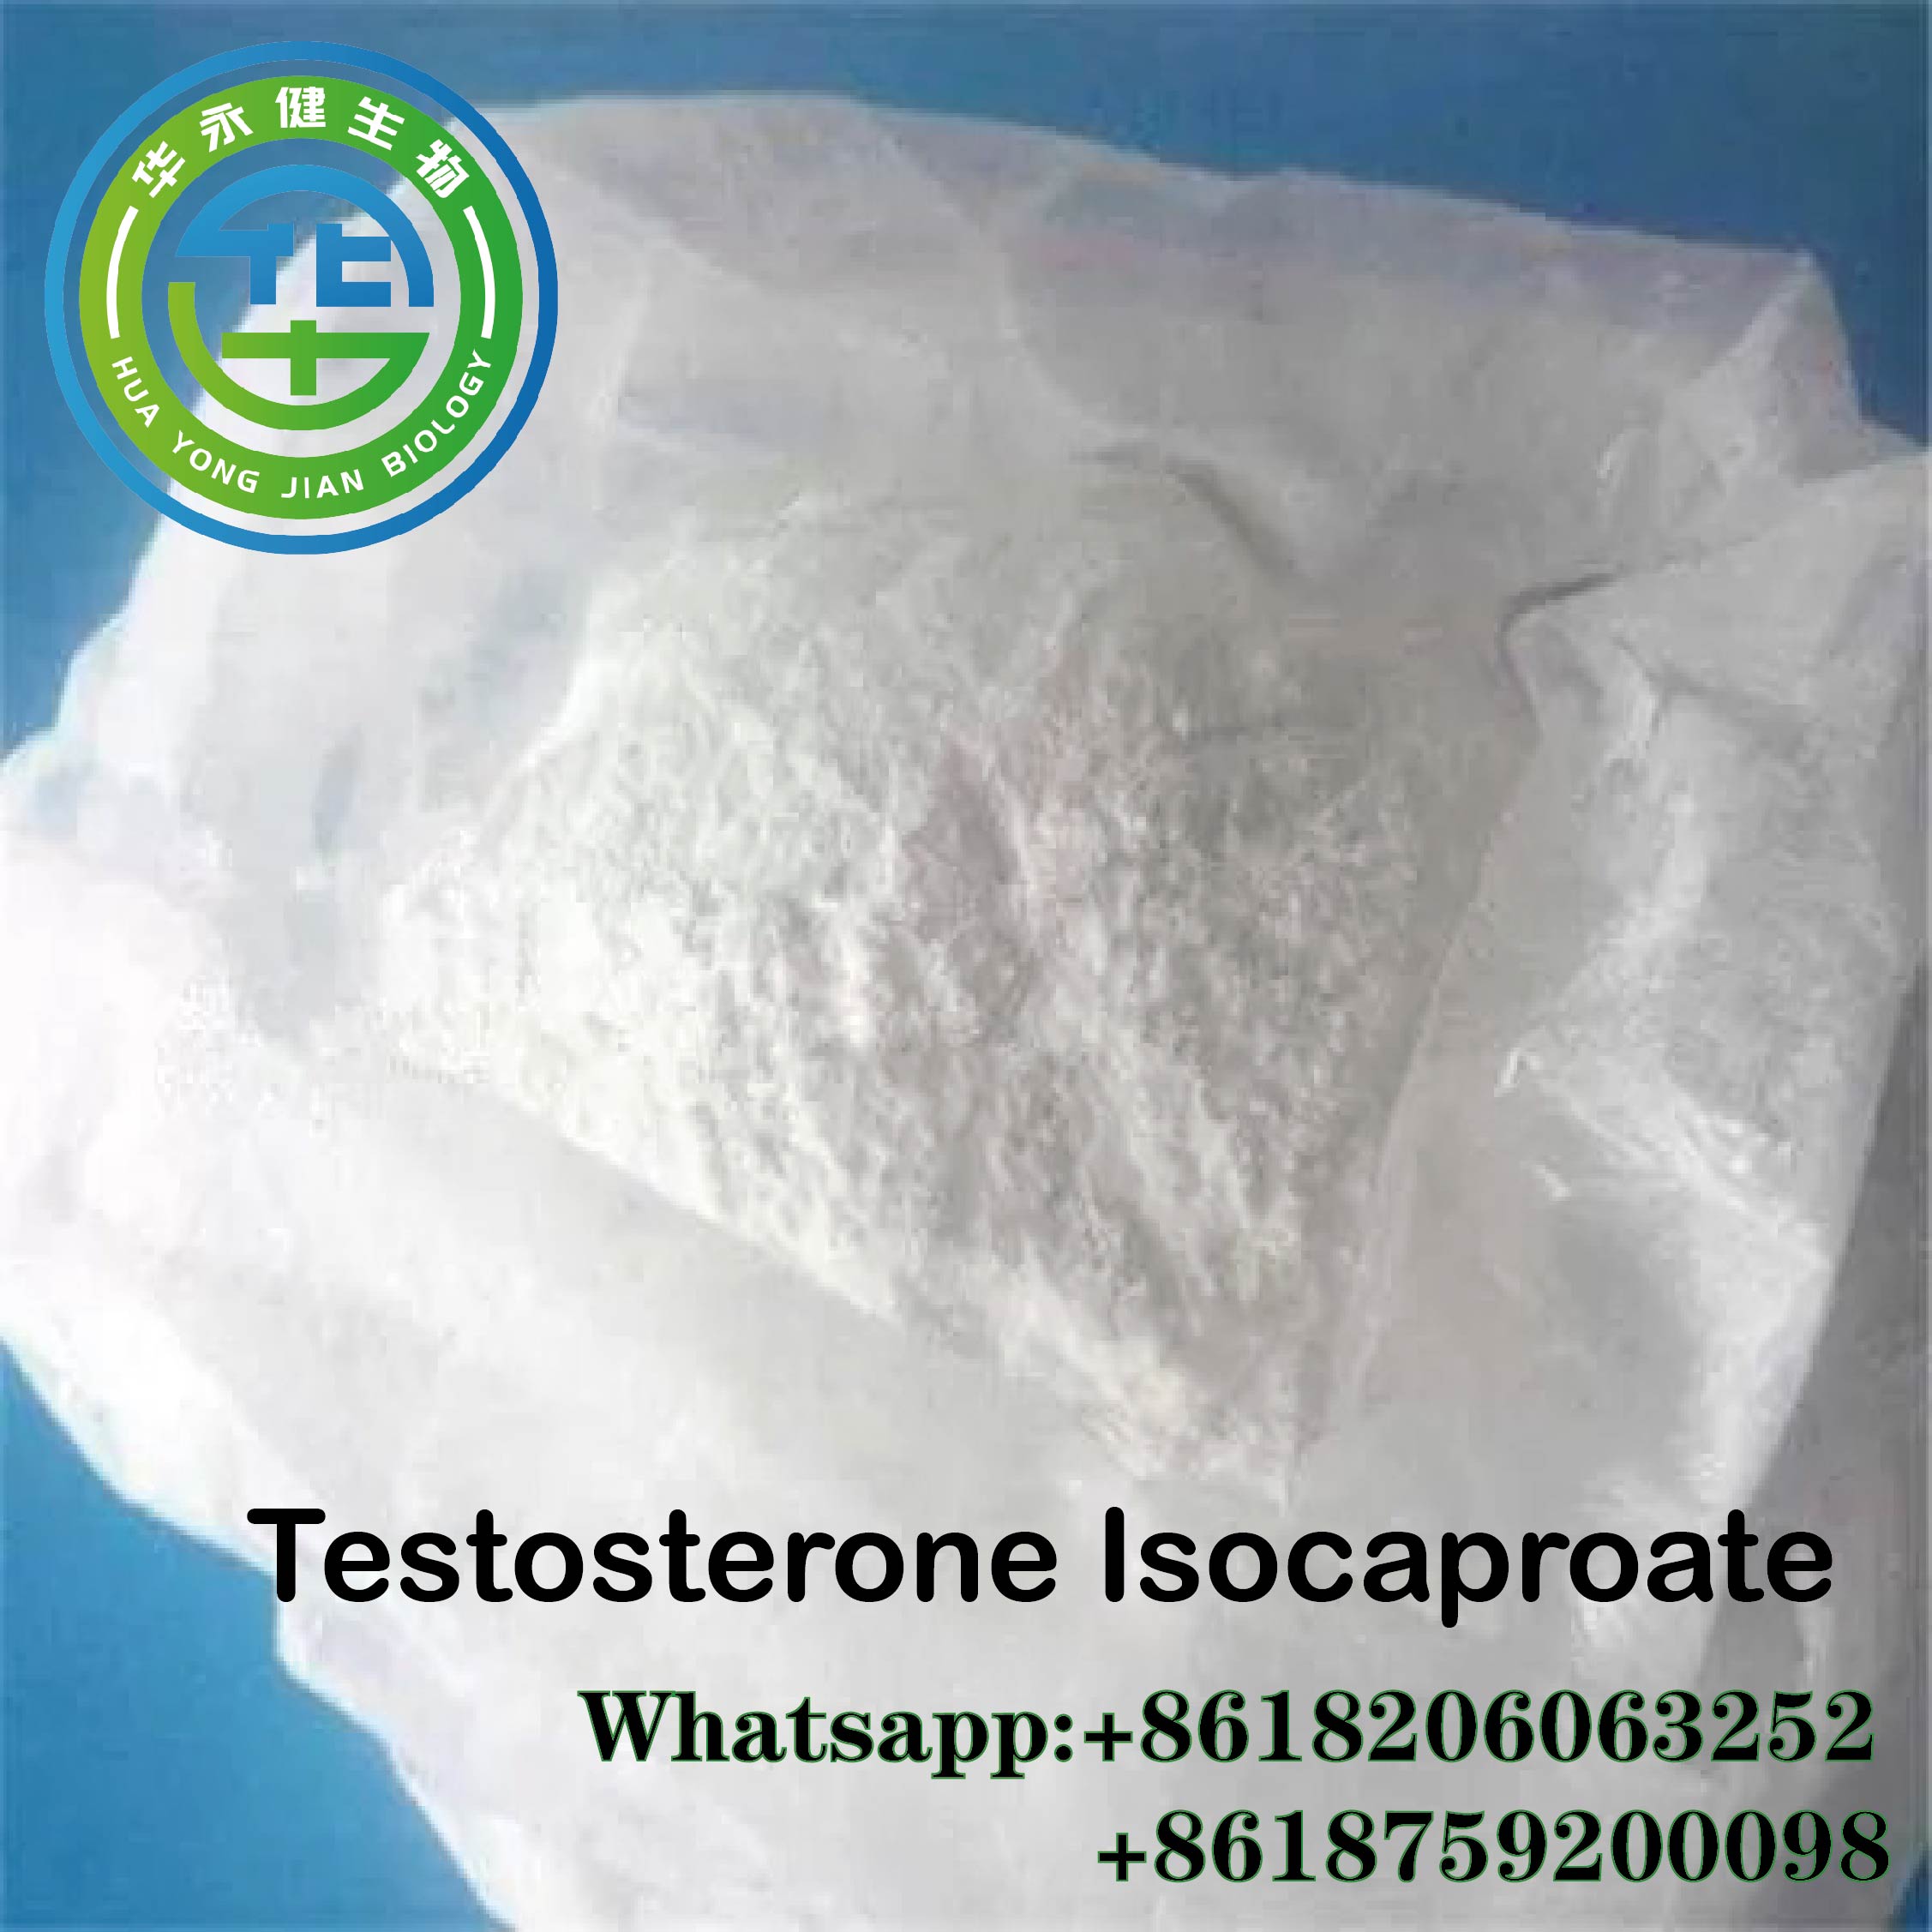 Testosterone Isocaproate Raw material powder Test I Steroid Hormone Testosterone Iso for Bodybuilding CAS 15262-86-9 